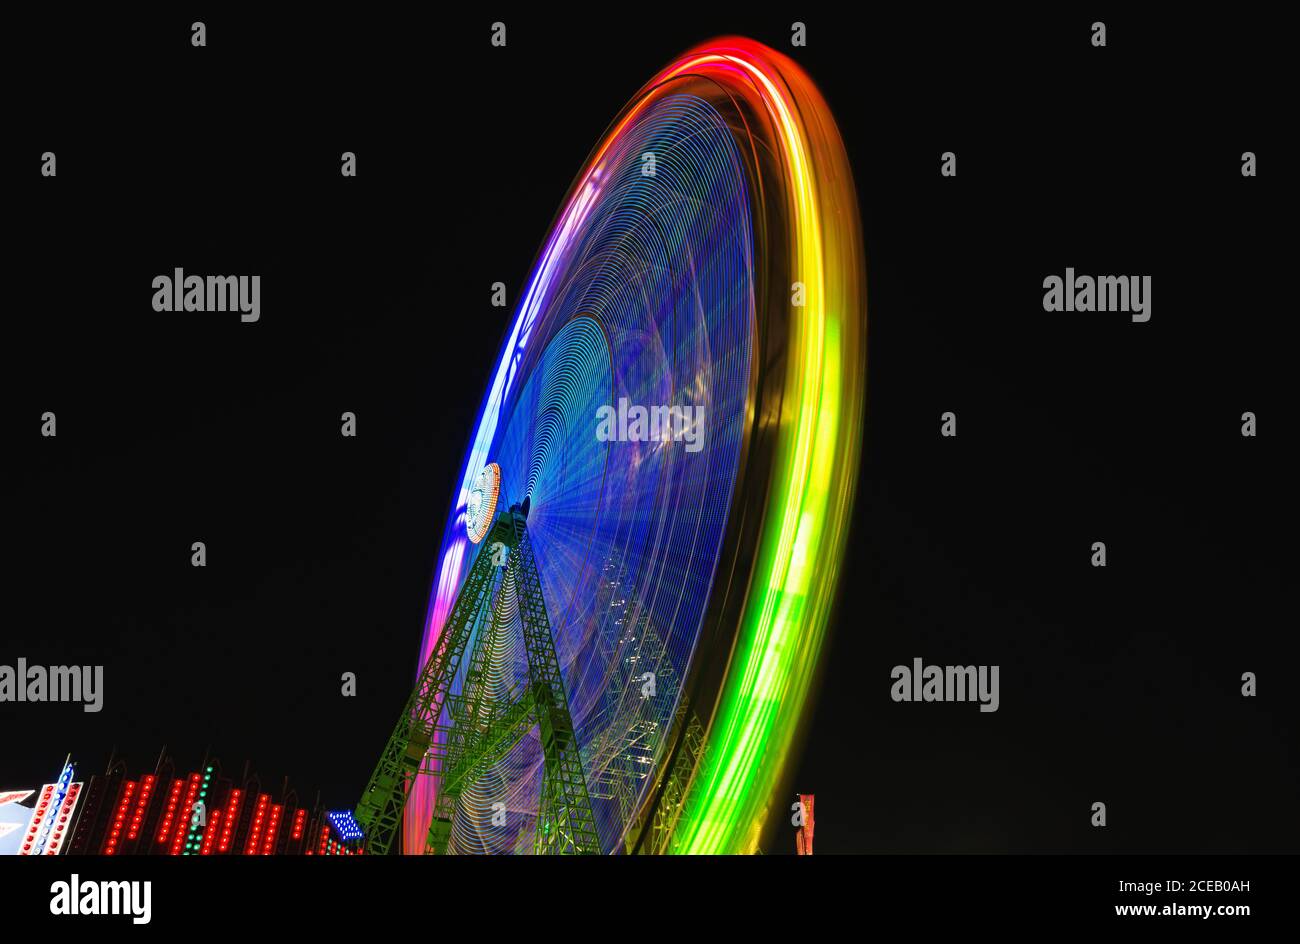 Traces of colorful lights on moving Ferris wheel on background of dark night sky. Stock Photo